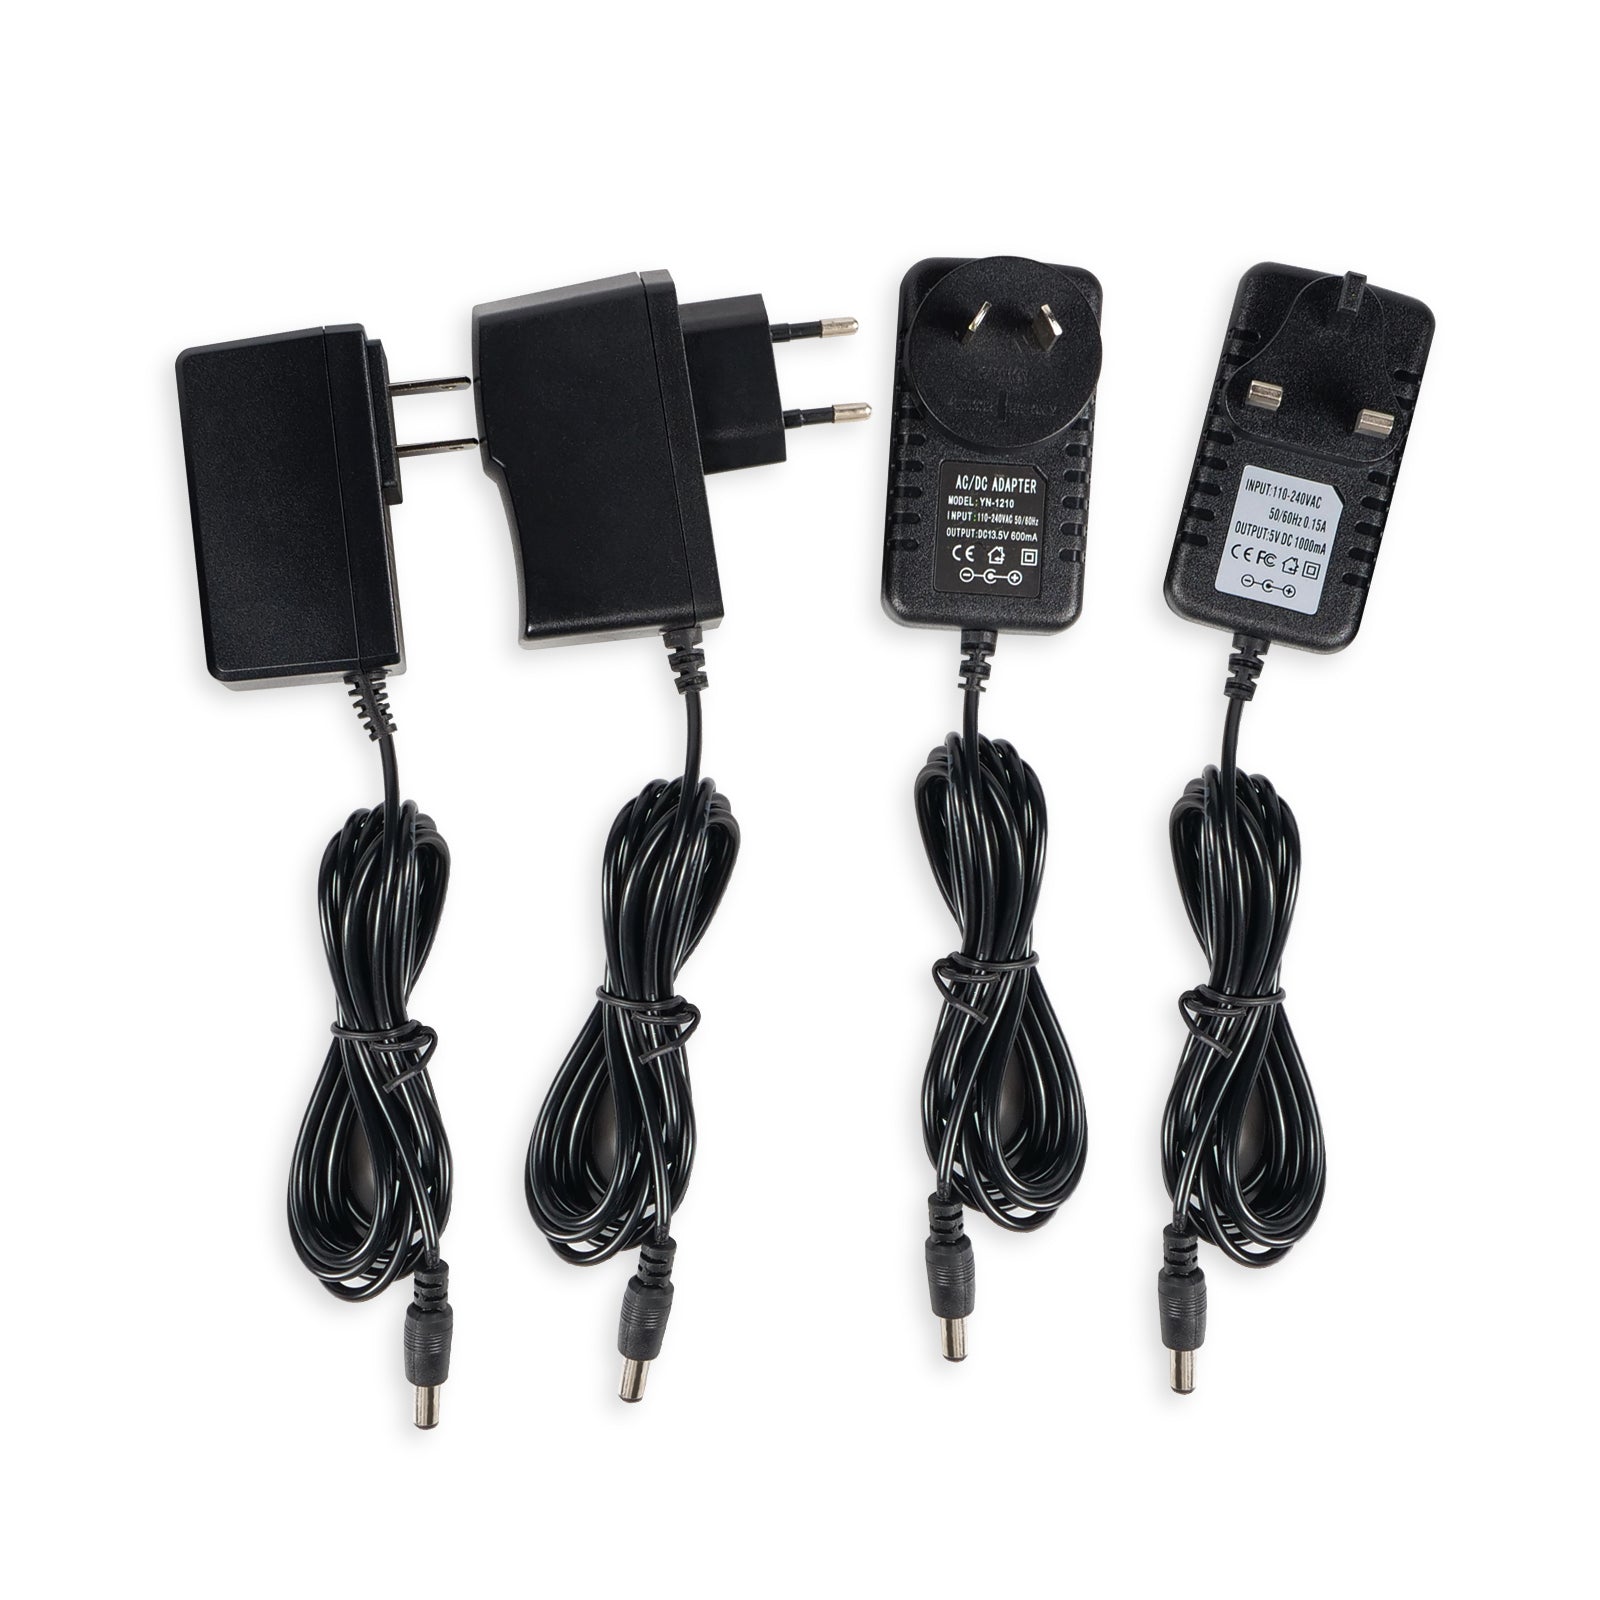 Phenyx Pro Power Adapter for Wireless System